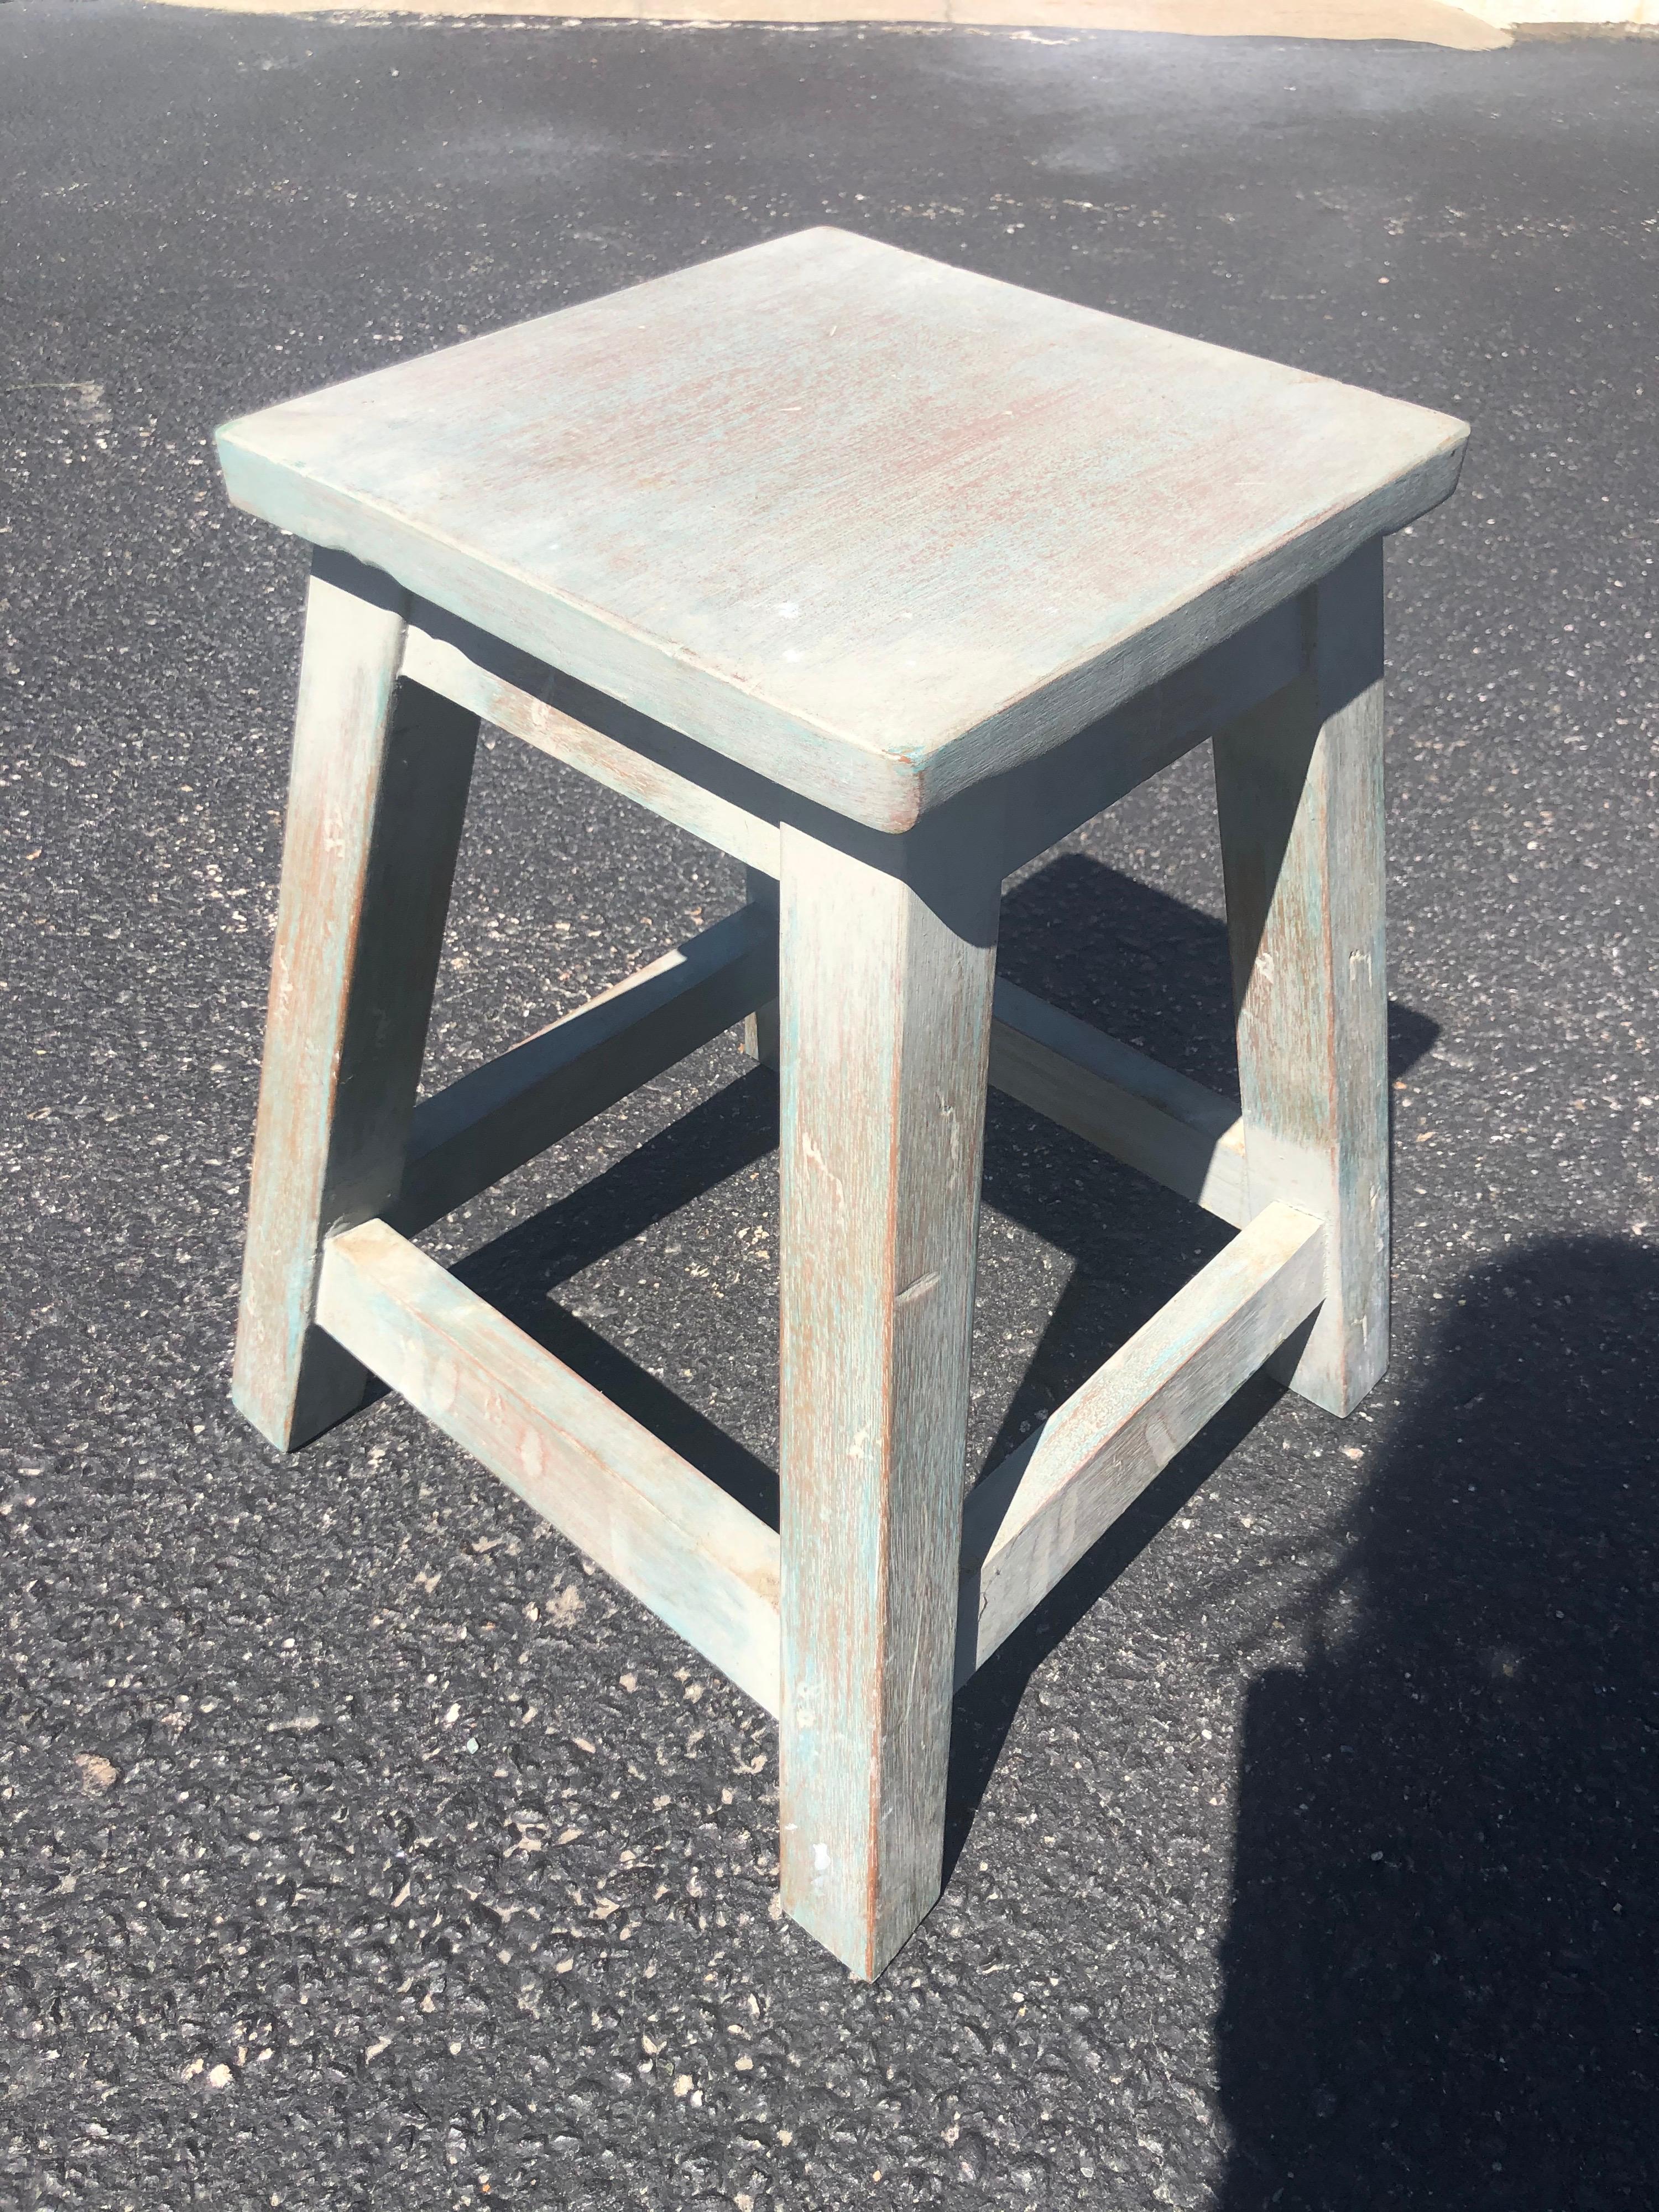 Wood Painted Pine Stool or Small Table